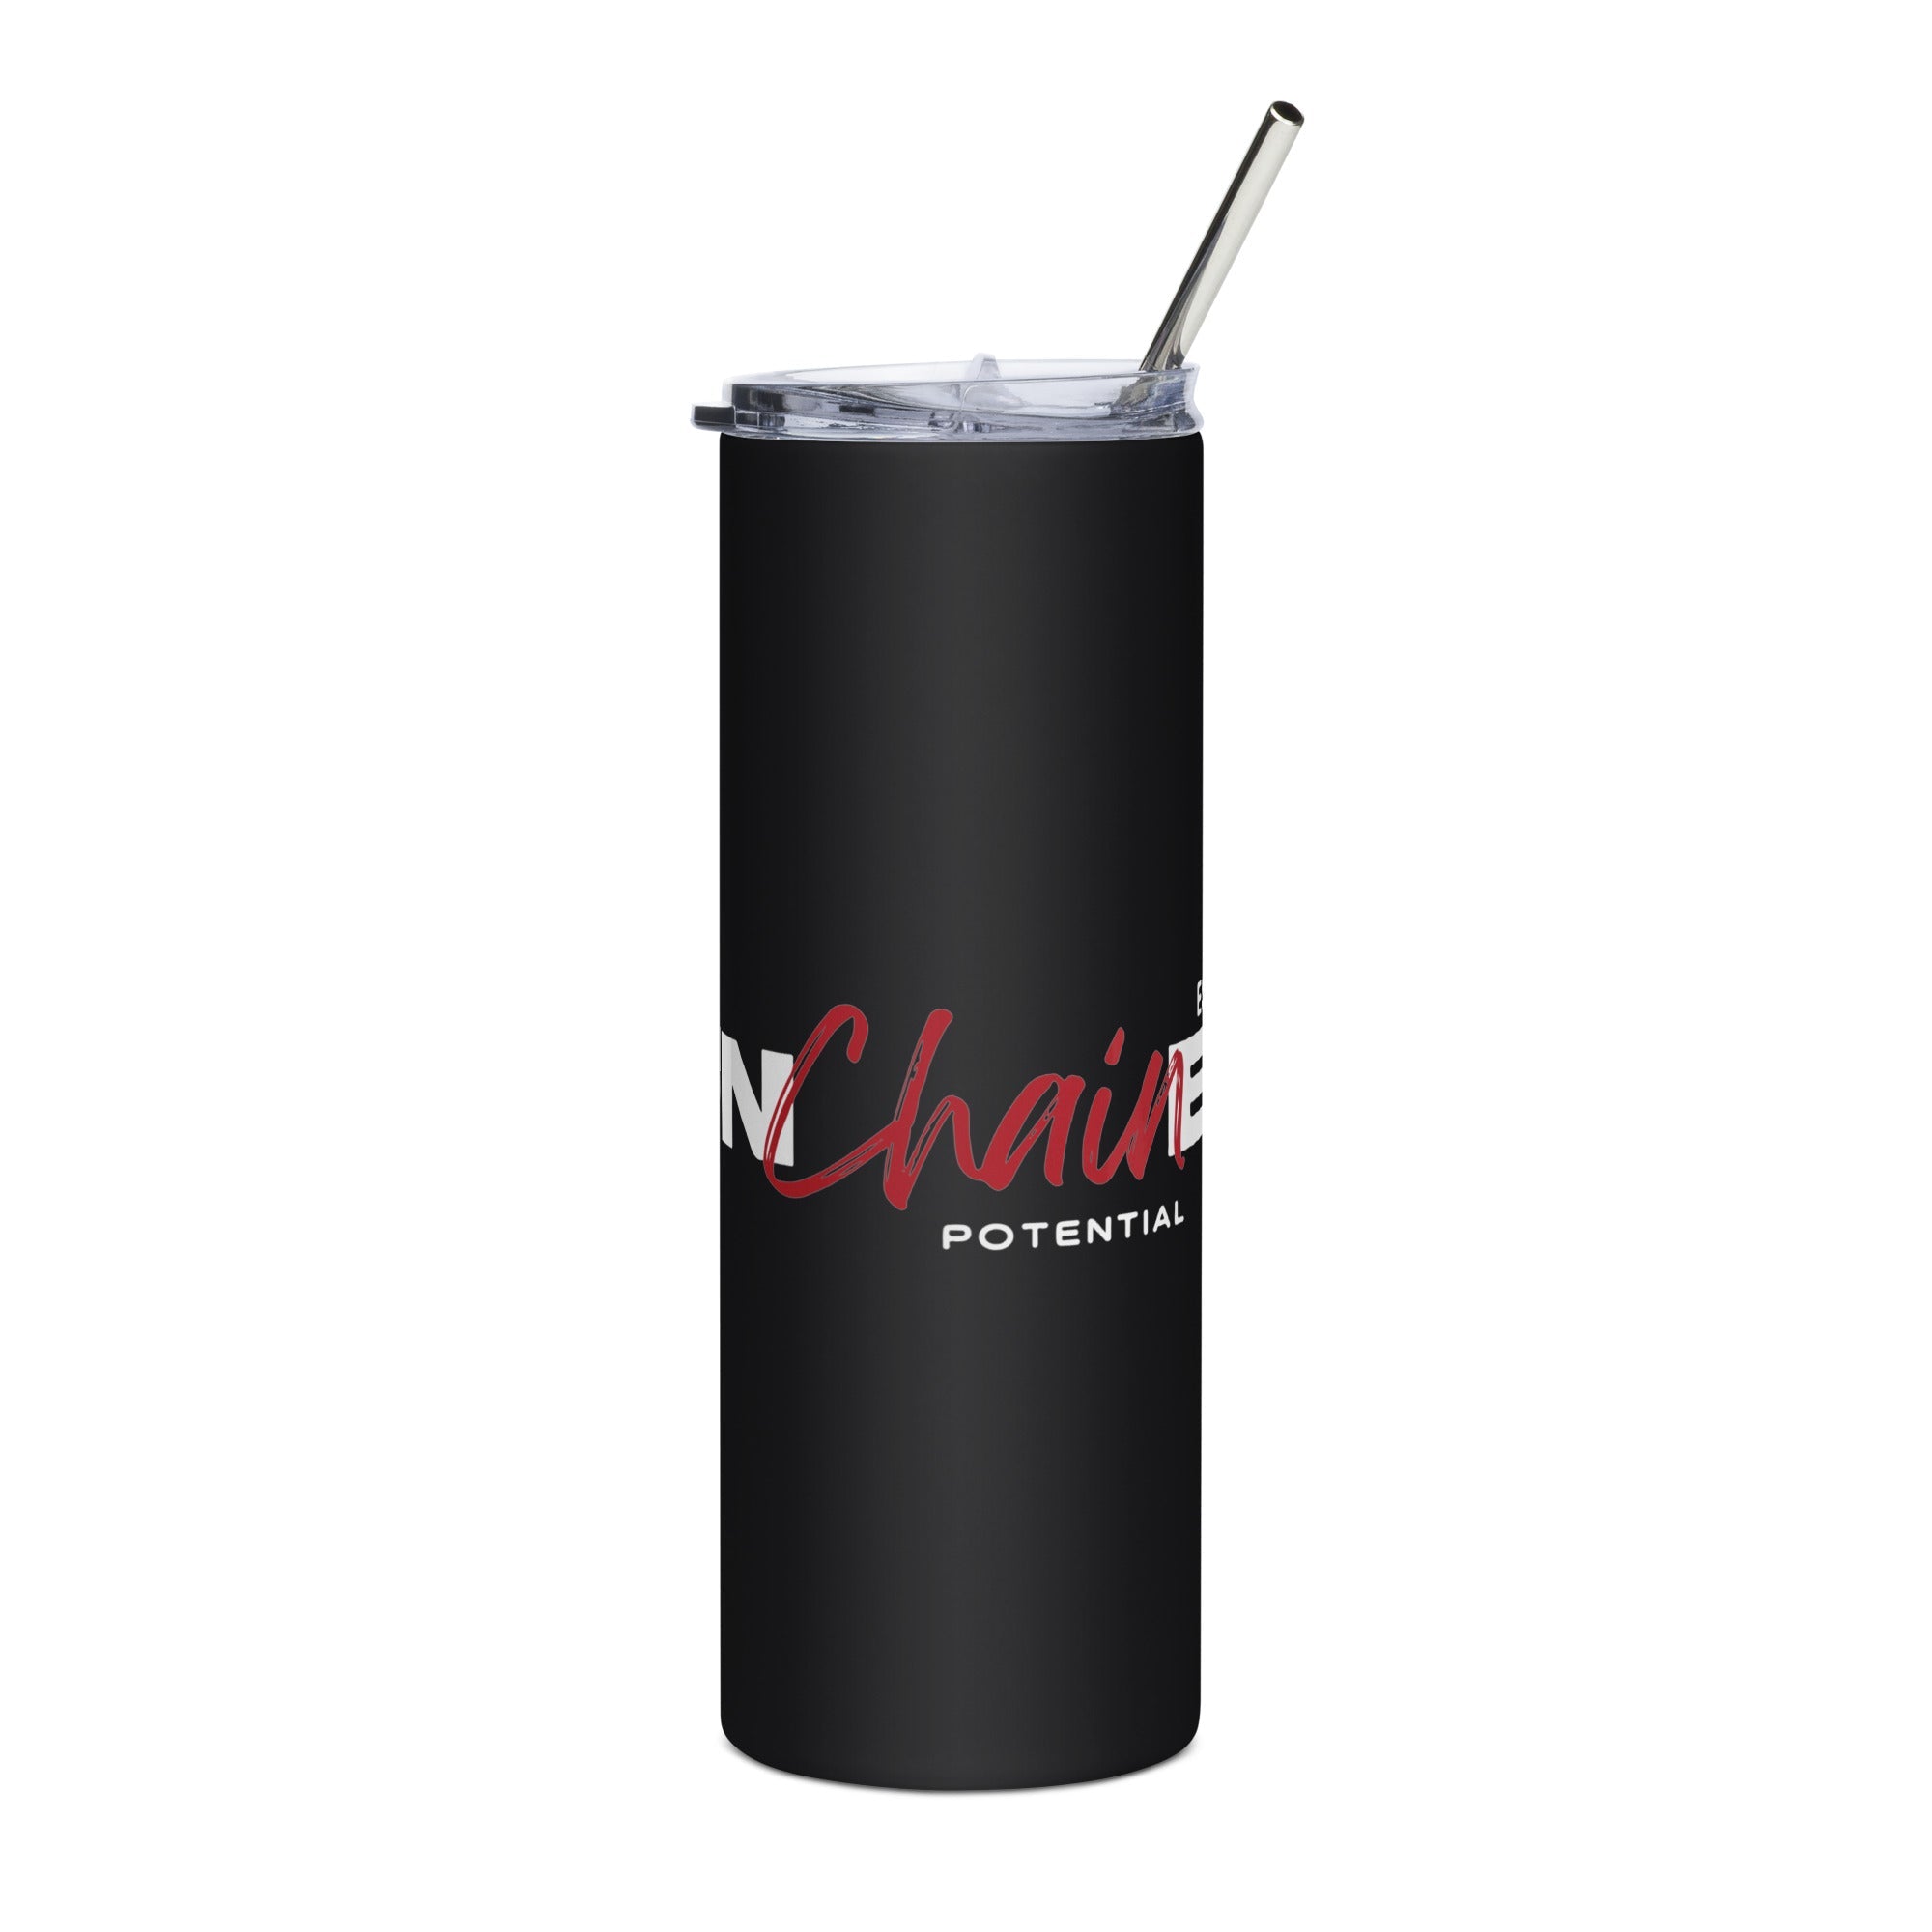 Unchained Potential Stainless steel tumbler